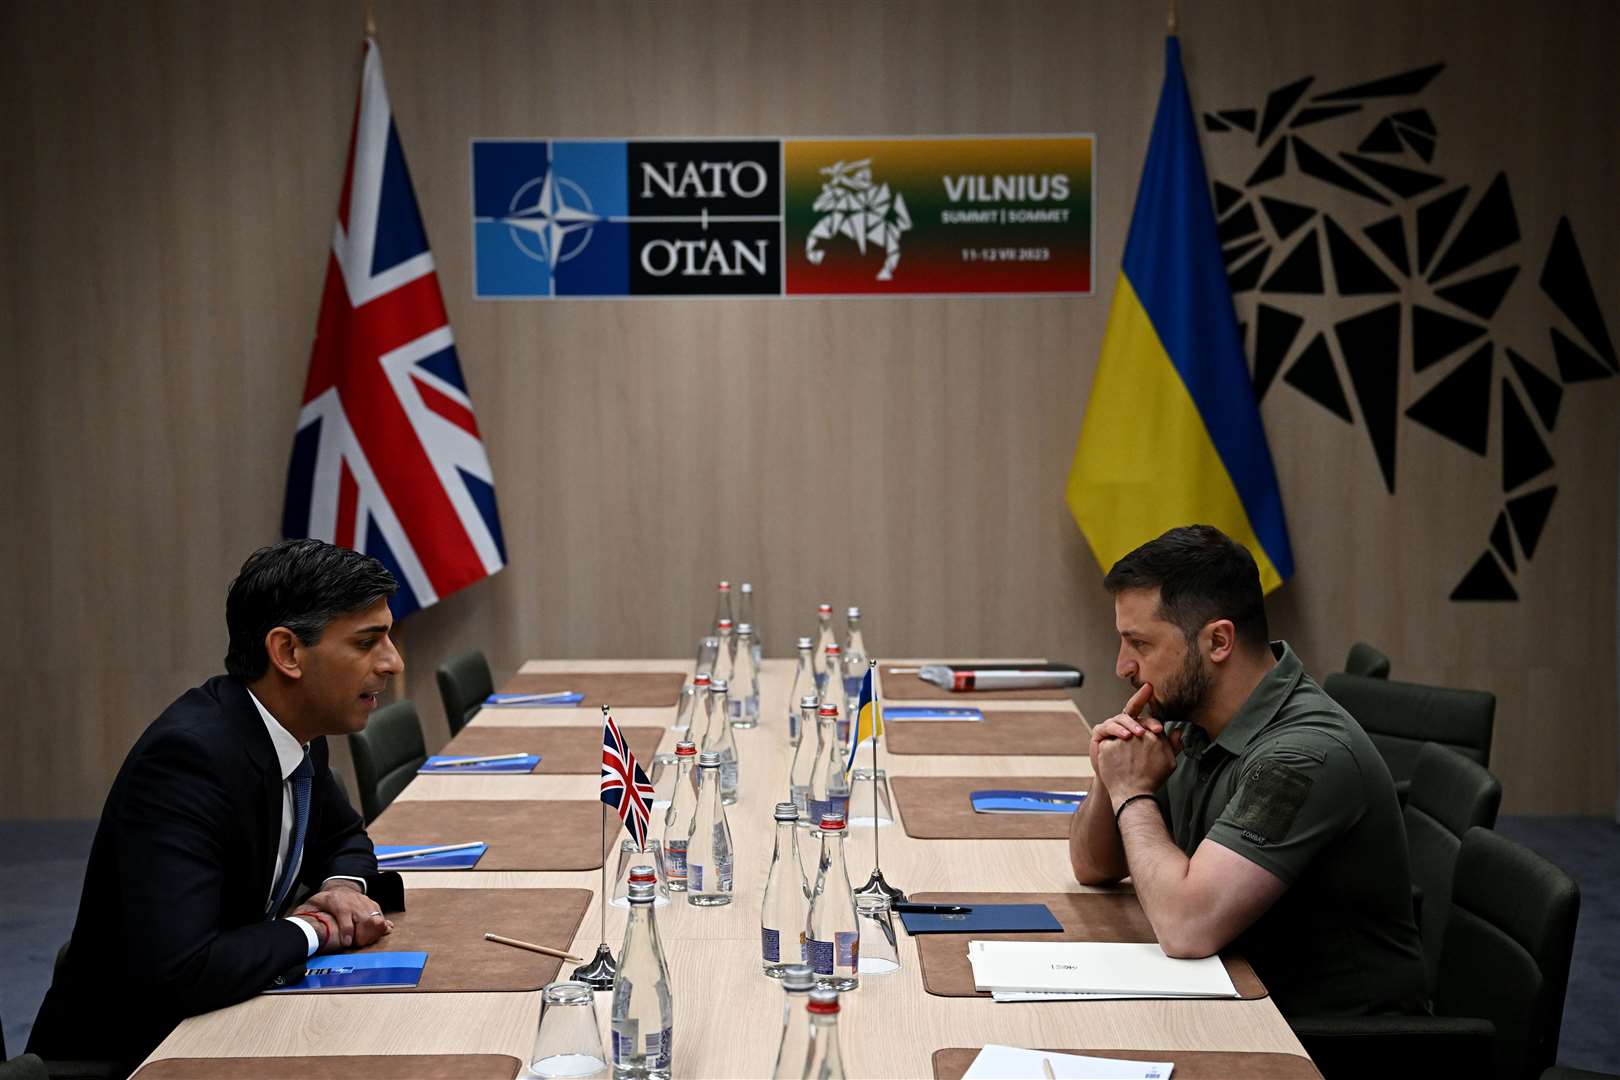 Rishi Sunak and Volodymyr Zelensky agreed to meet in private without aides (Paul Ellis/PA)